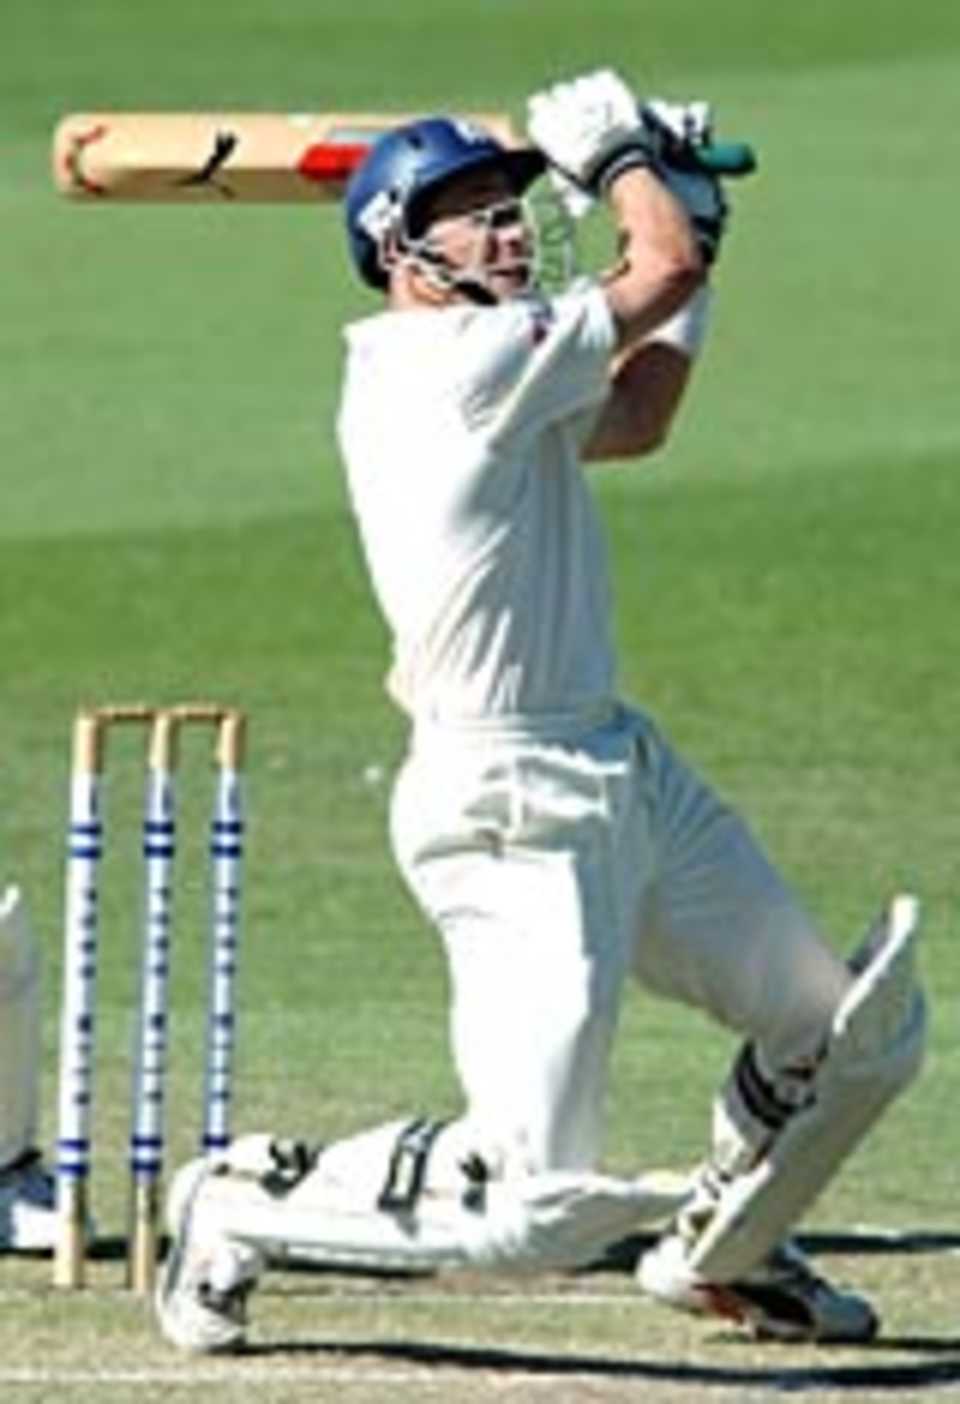 David Hussey hits out on his way to 121*, Western Australia v Victoria, Perth, December 21, 2003